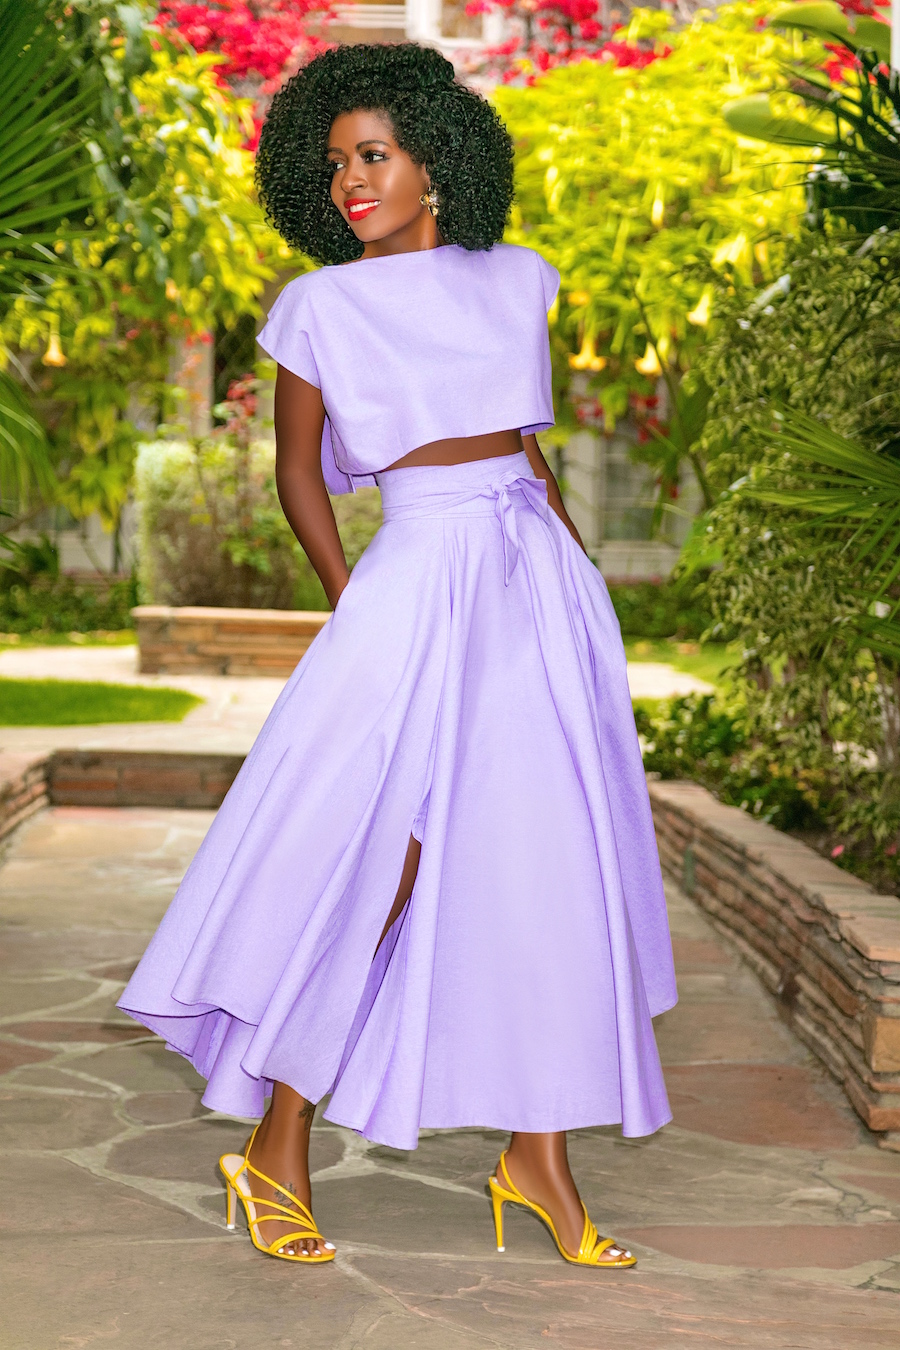 Style Pantry | Crop Top + Belted High Waist Skirt